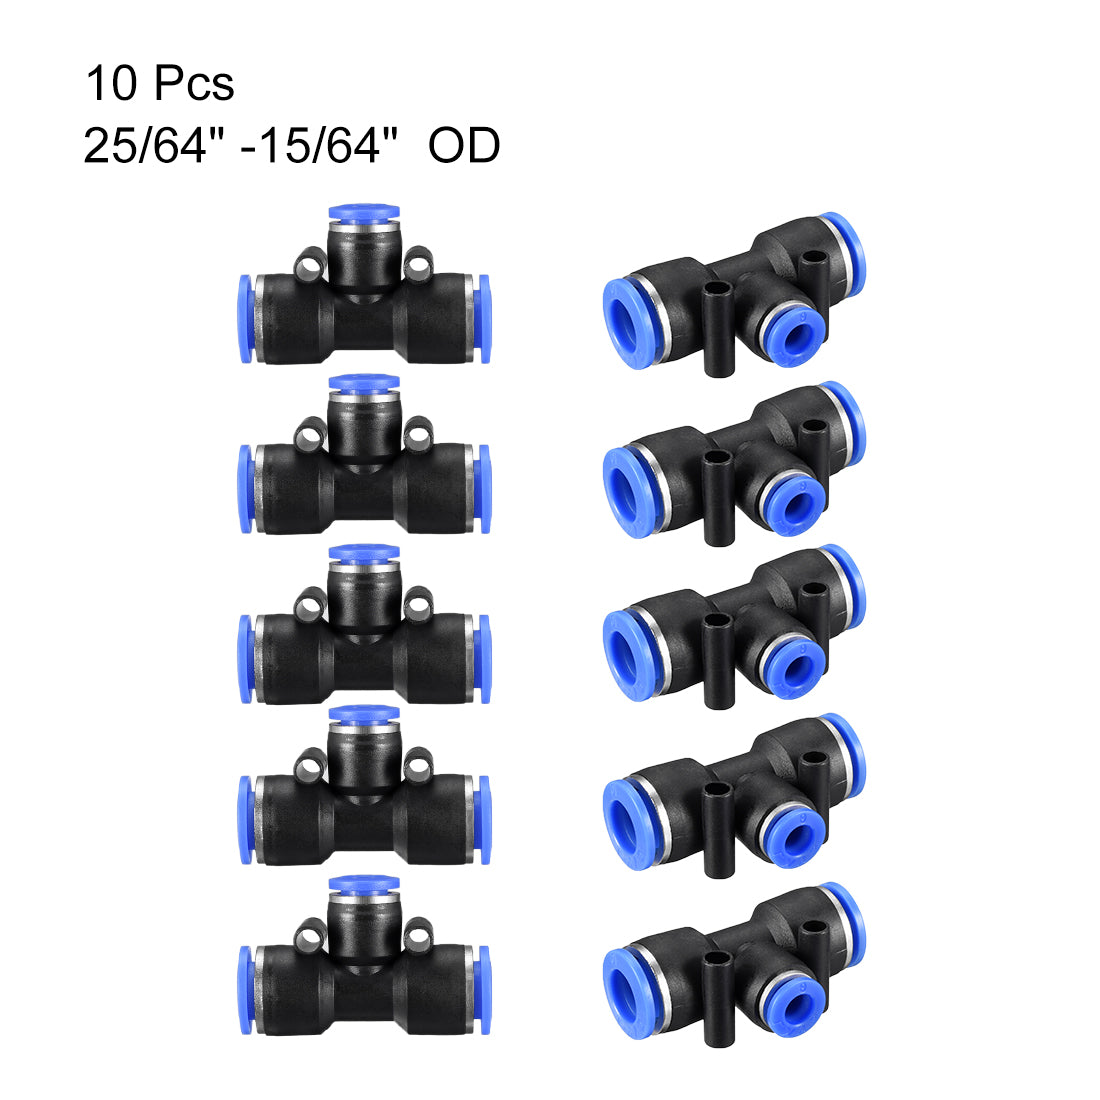 uxcell Uxcell 10 pcs Push To Connect Fittings T Type Tube Connect 25/64“ -15/64” od Push Fit Fittings Tube Fittings Push Lock Blue (10-6mm T tee)